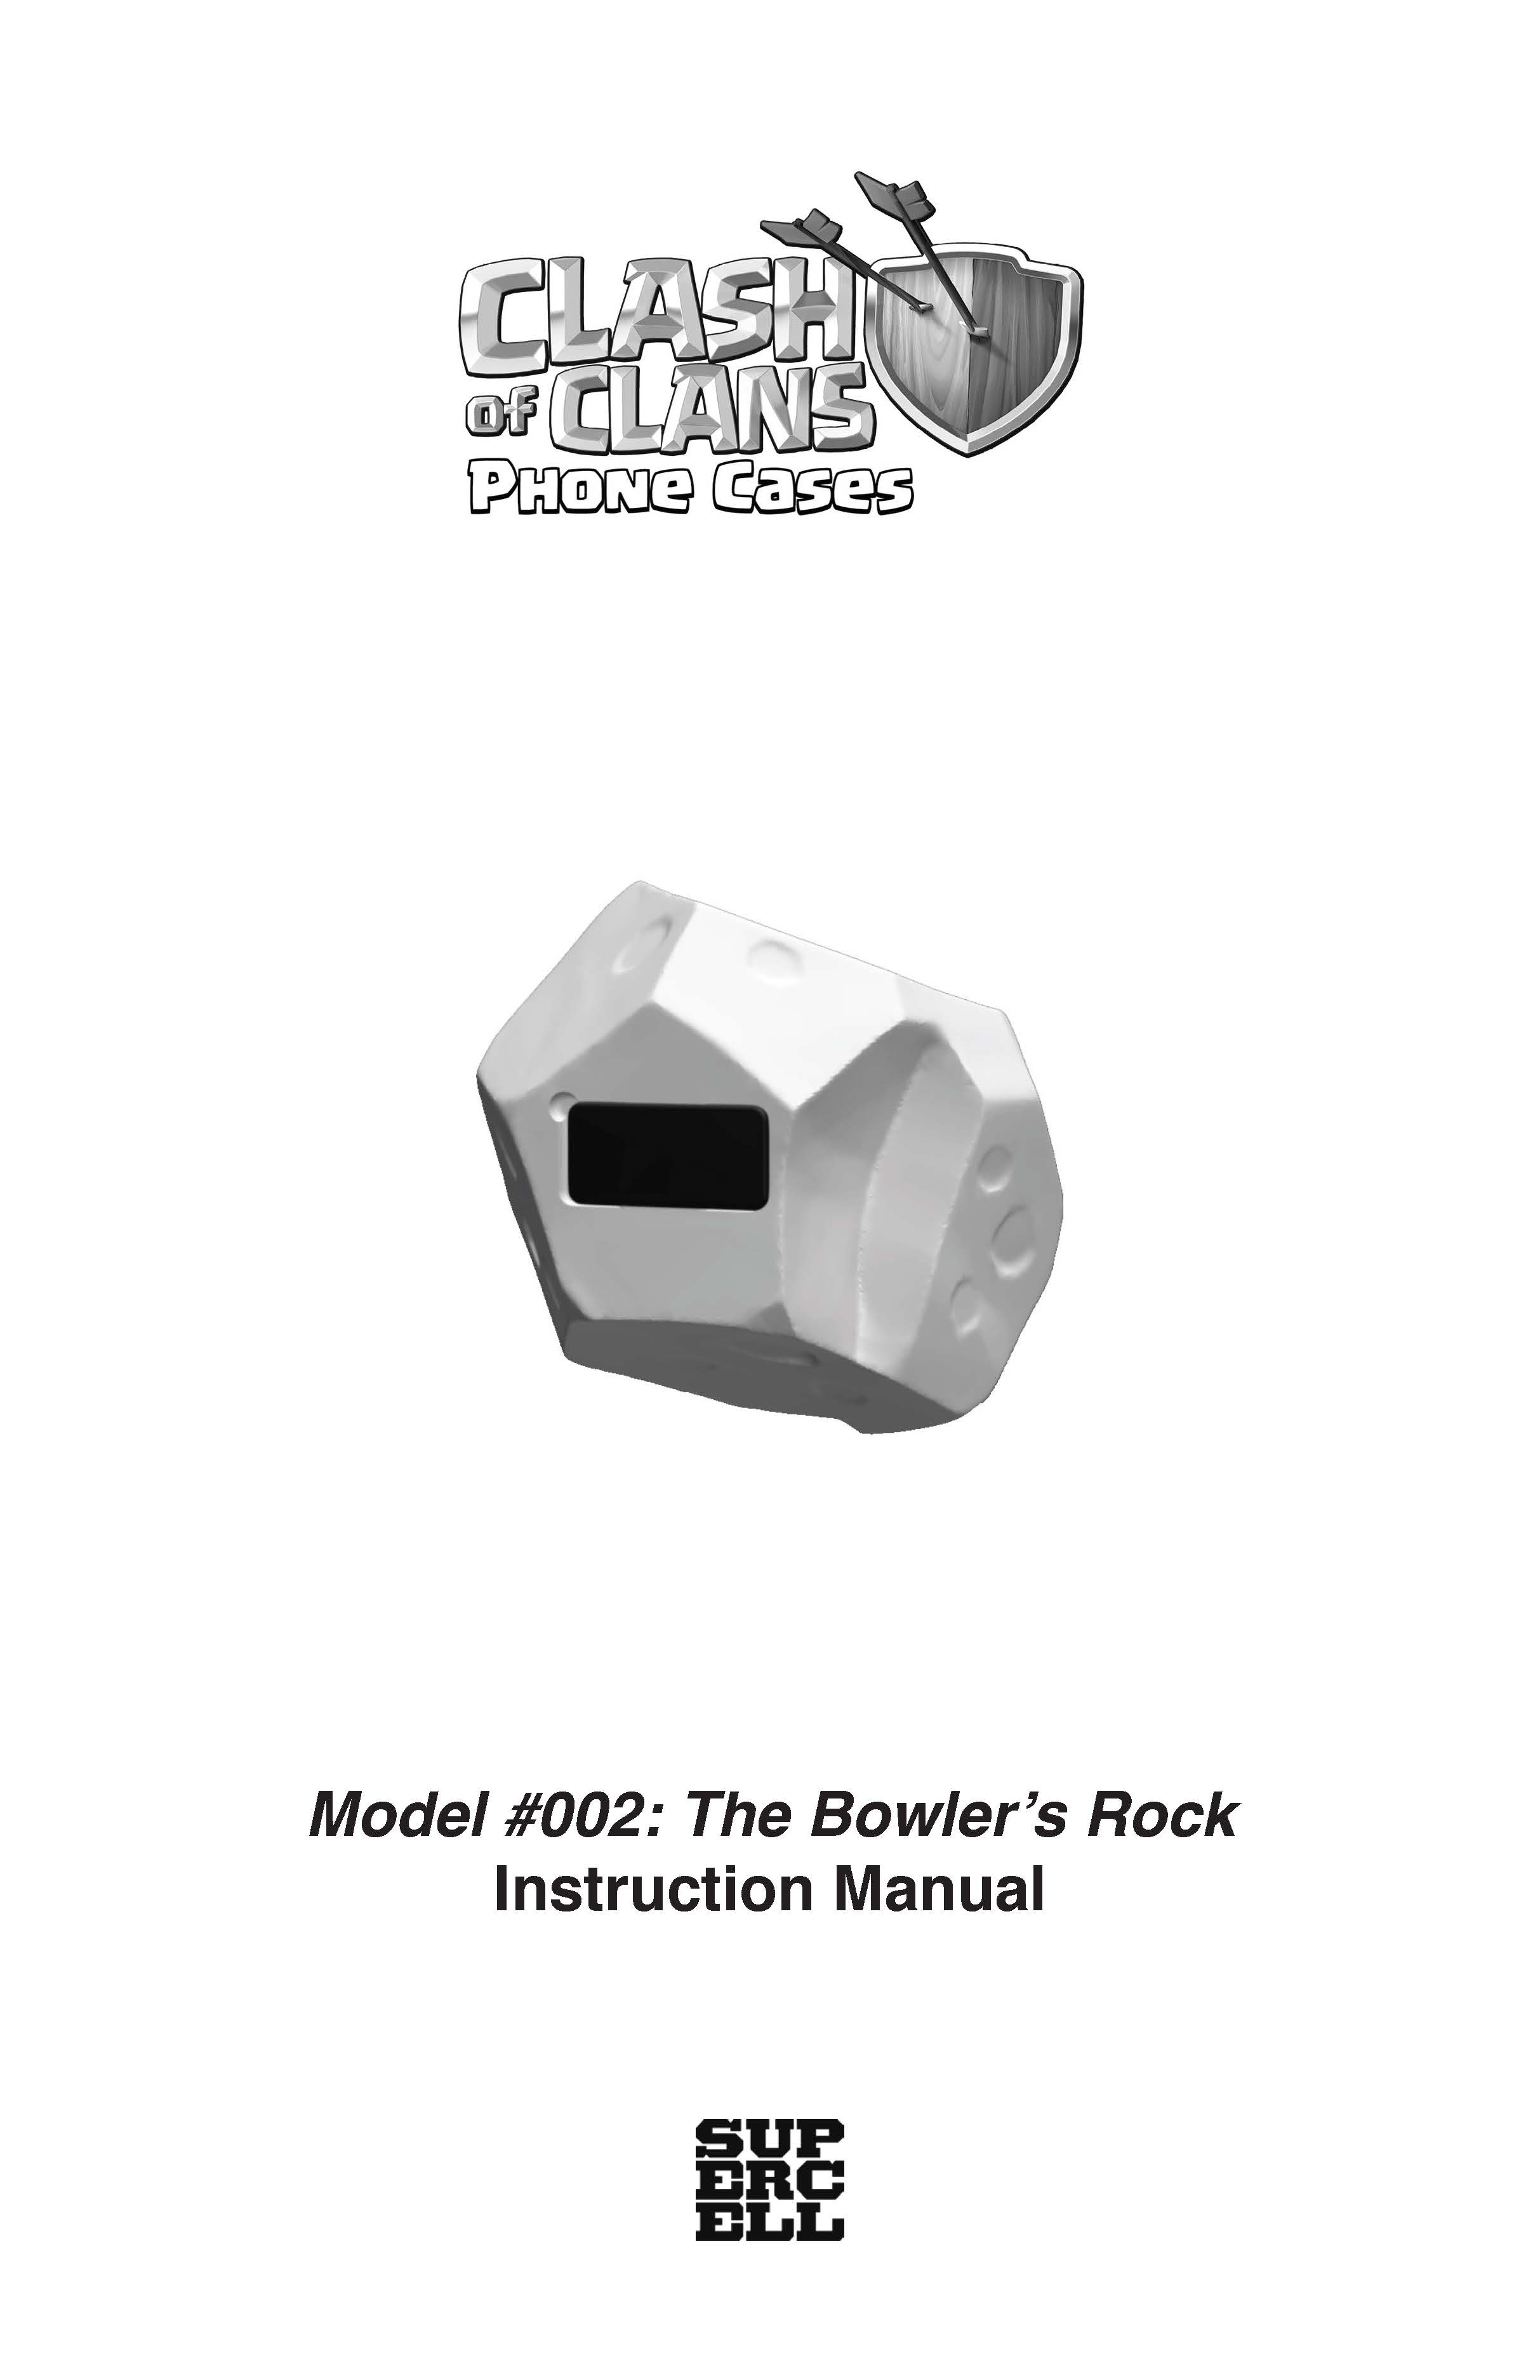 Clash-of-Clans-Phone-Cases-Instruction-Manual-Model-002-The-Bowlers-Rock_Page_1.jpg